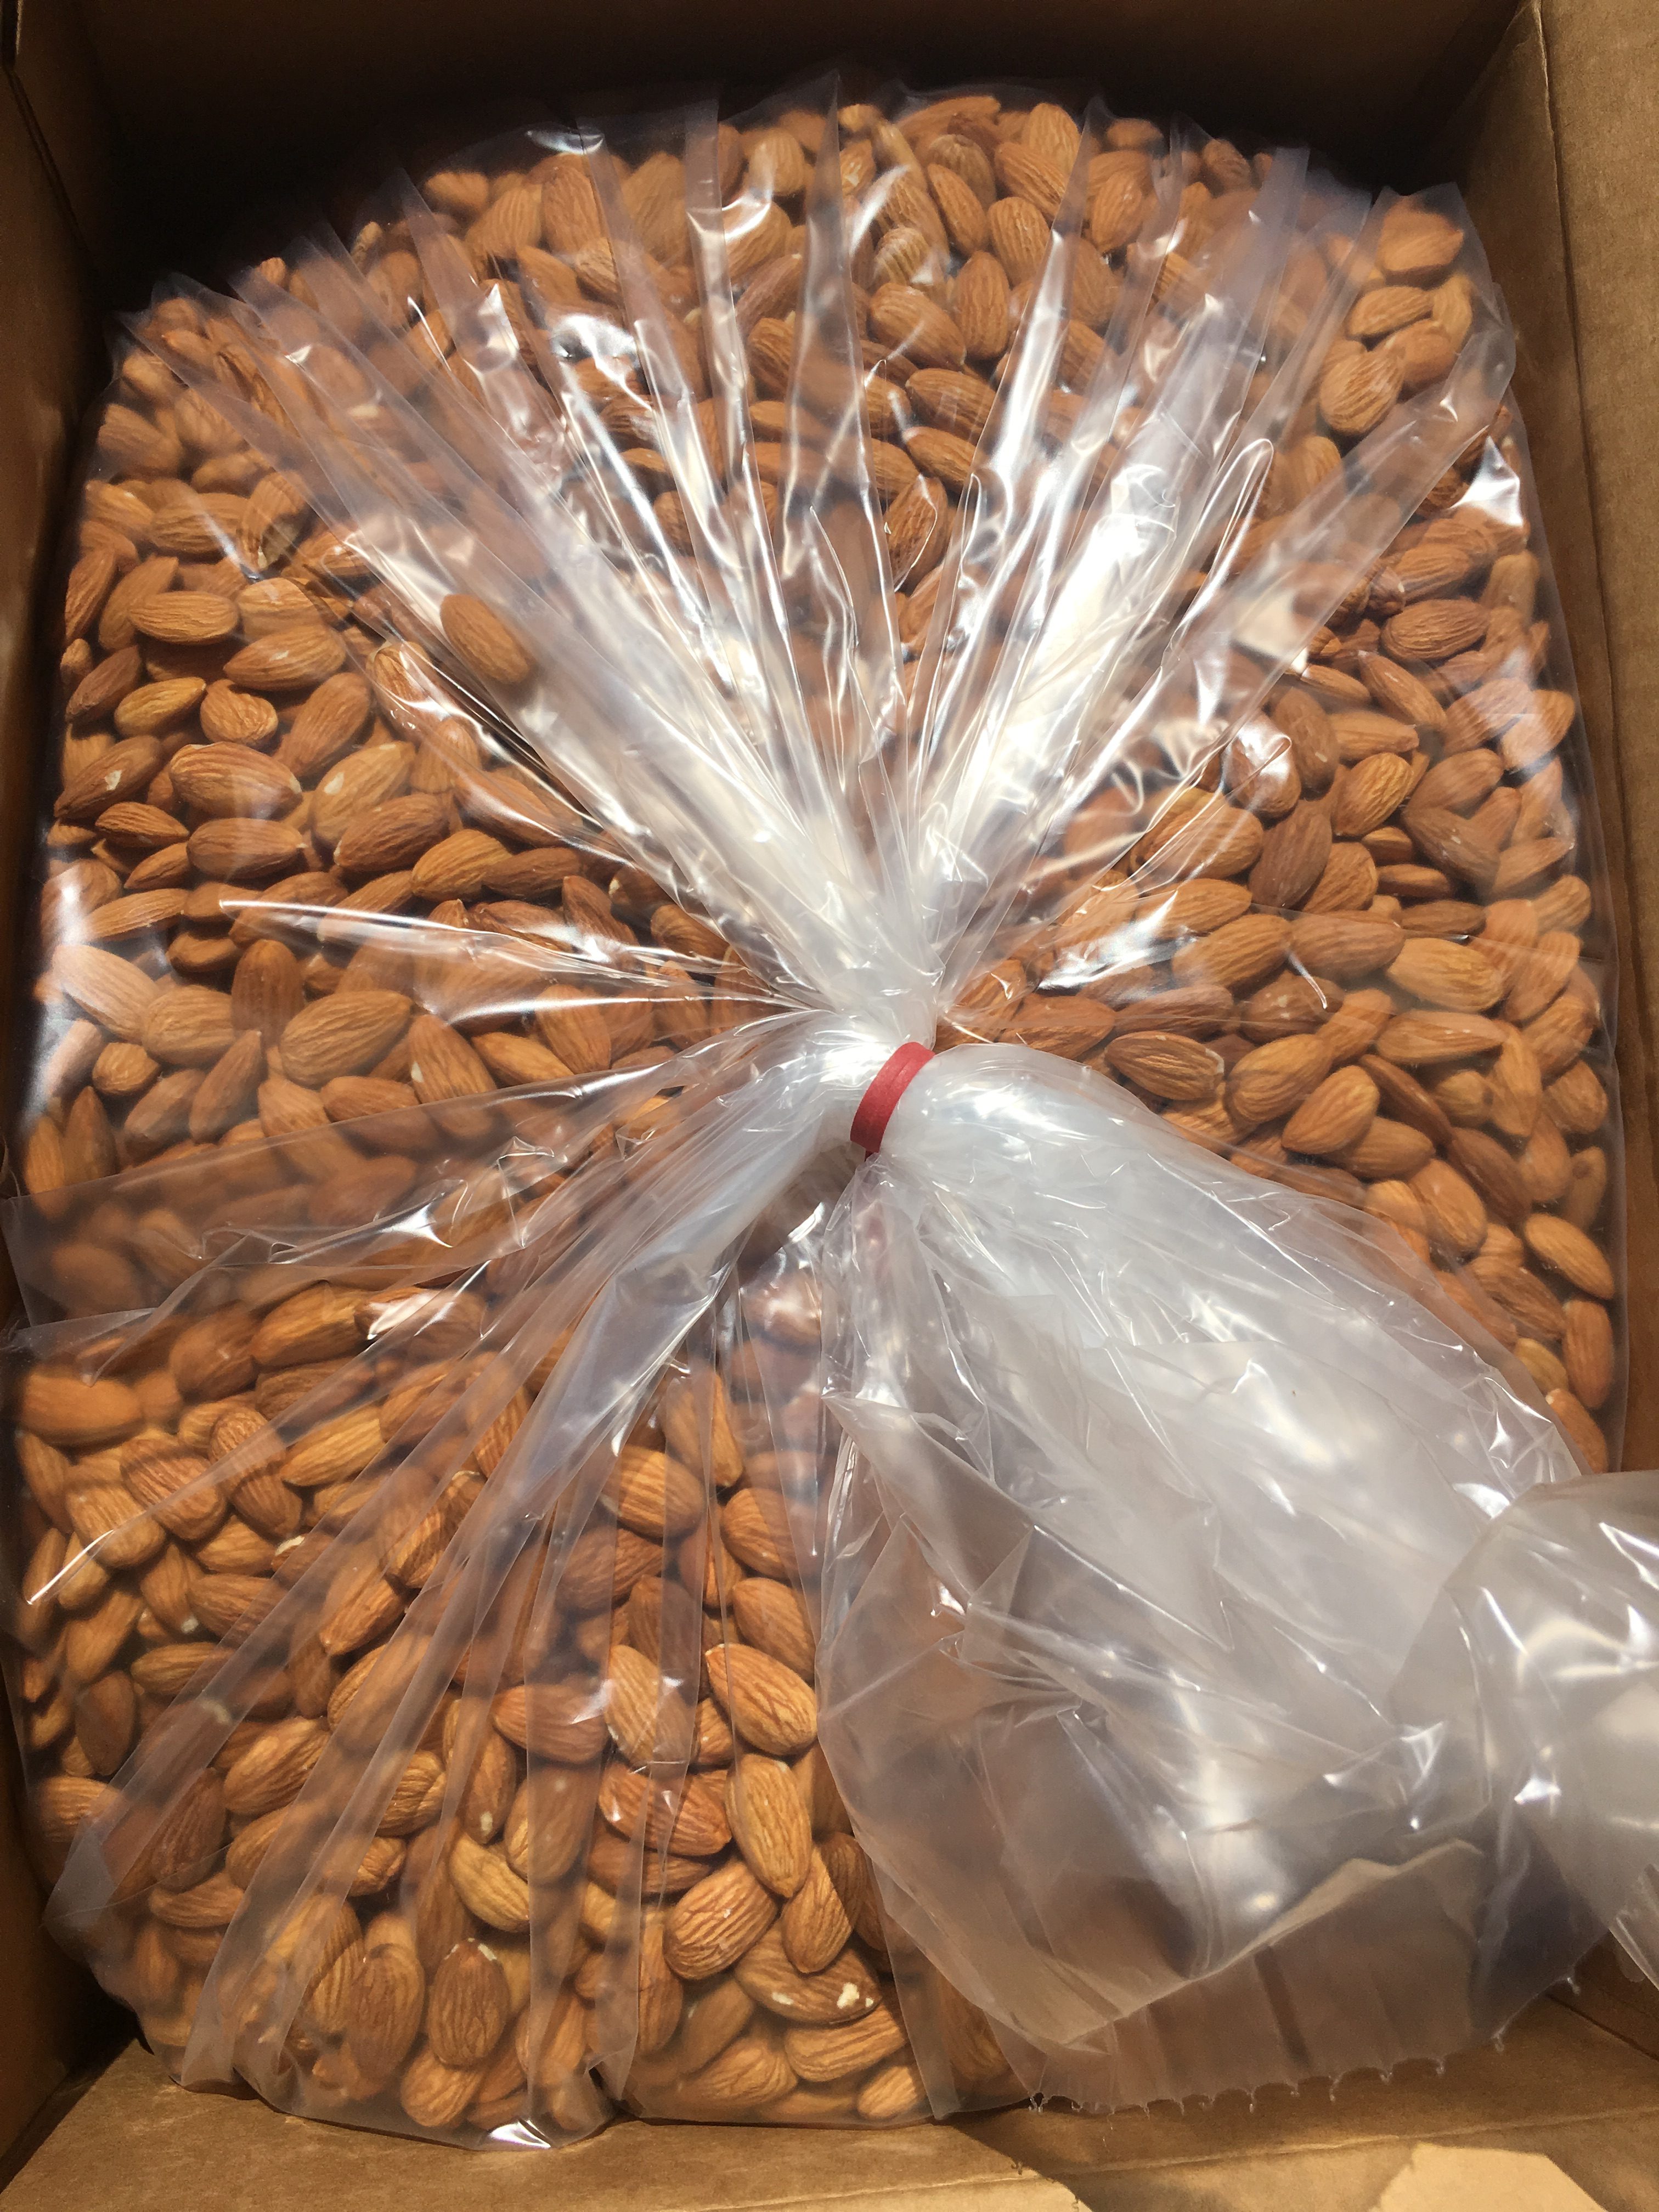 Organic Unpasteurized Almonds 50 Pounds- FREE SHIPPING!